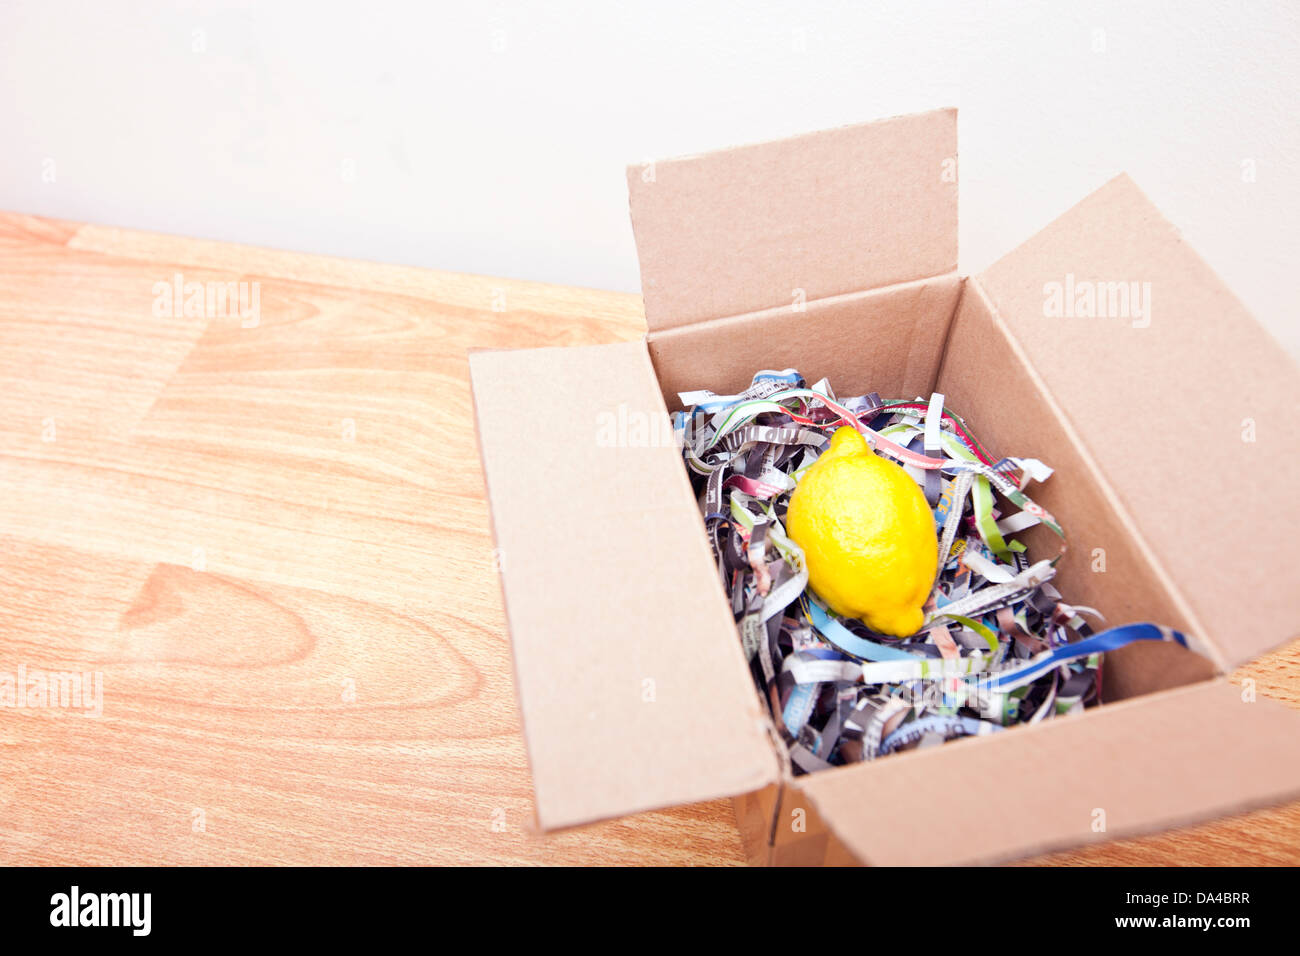 Lemon wrapped up in a box Stock Photo